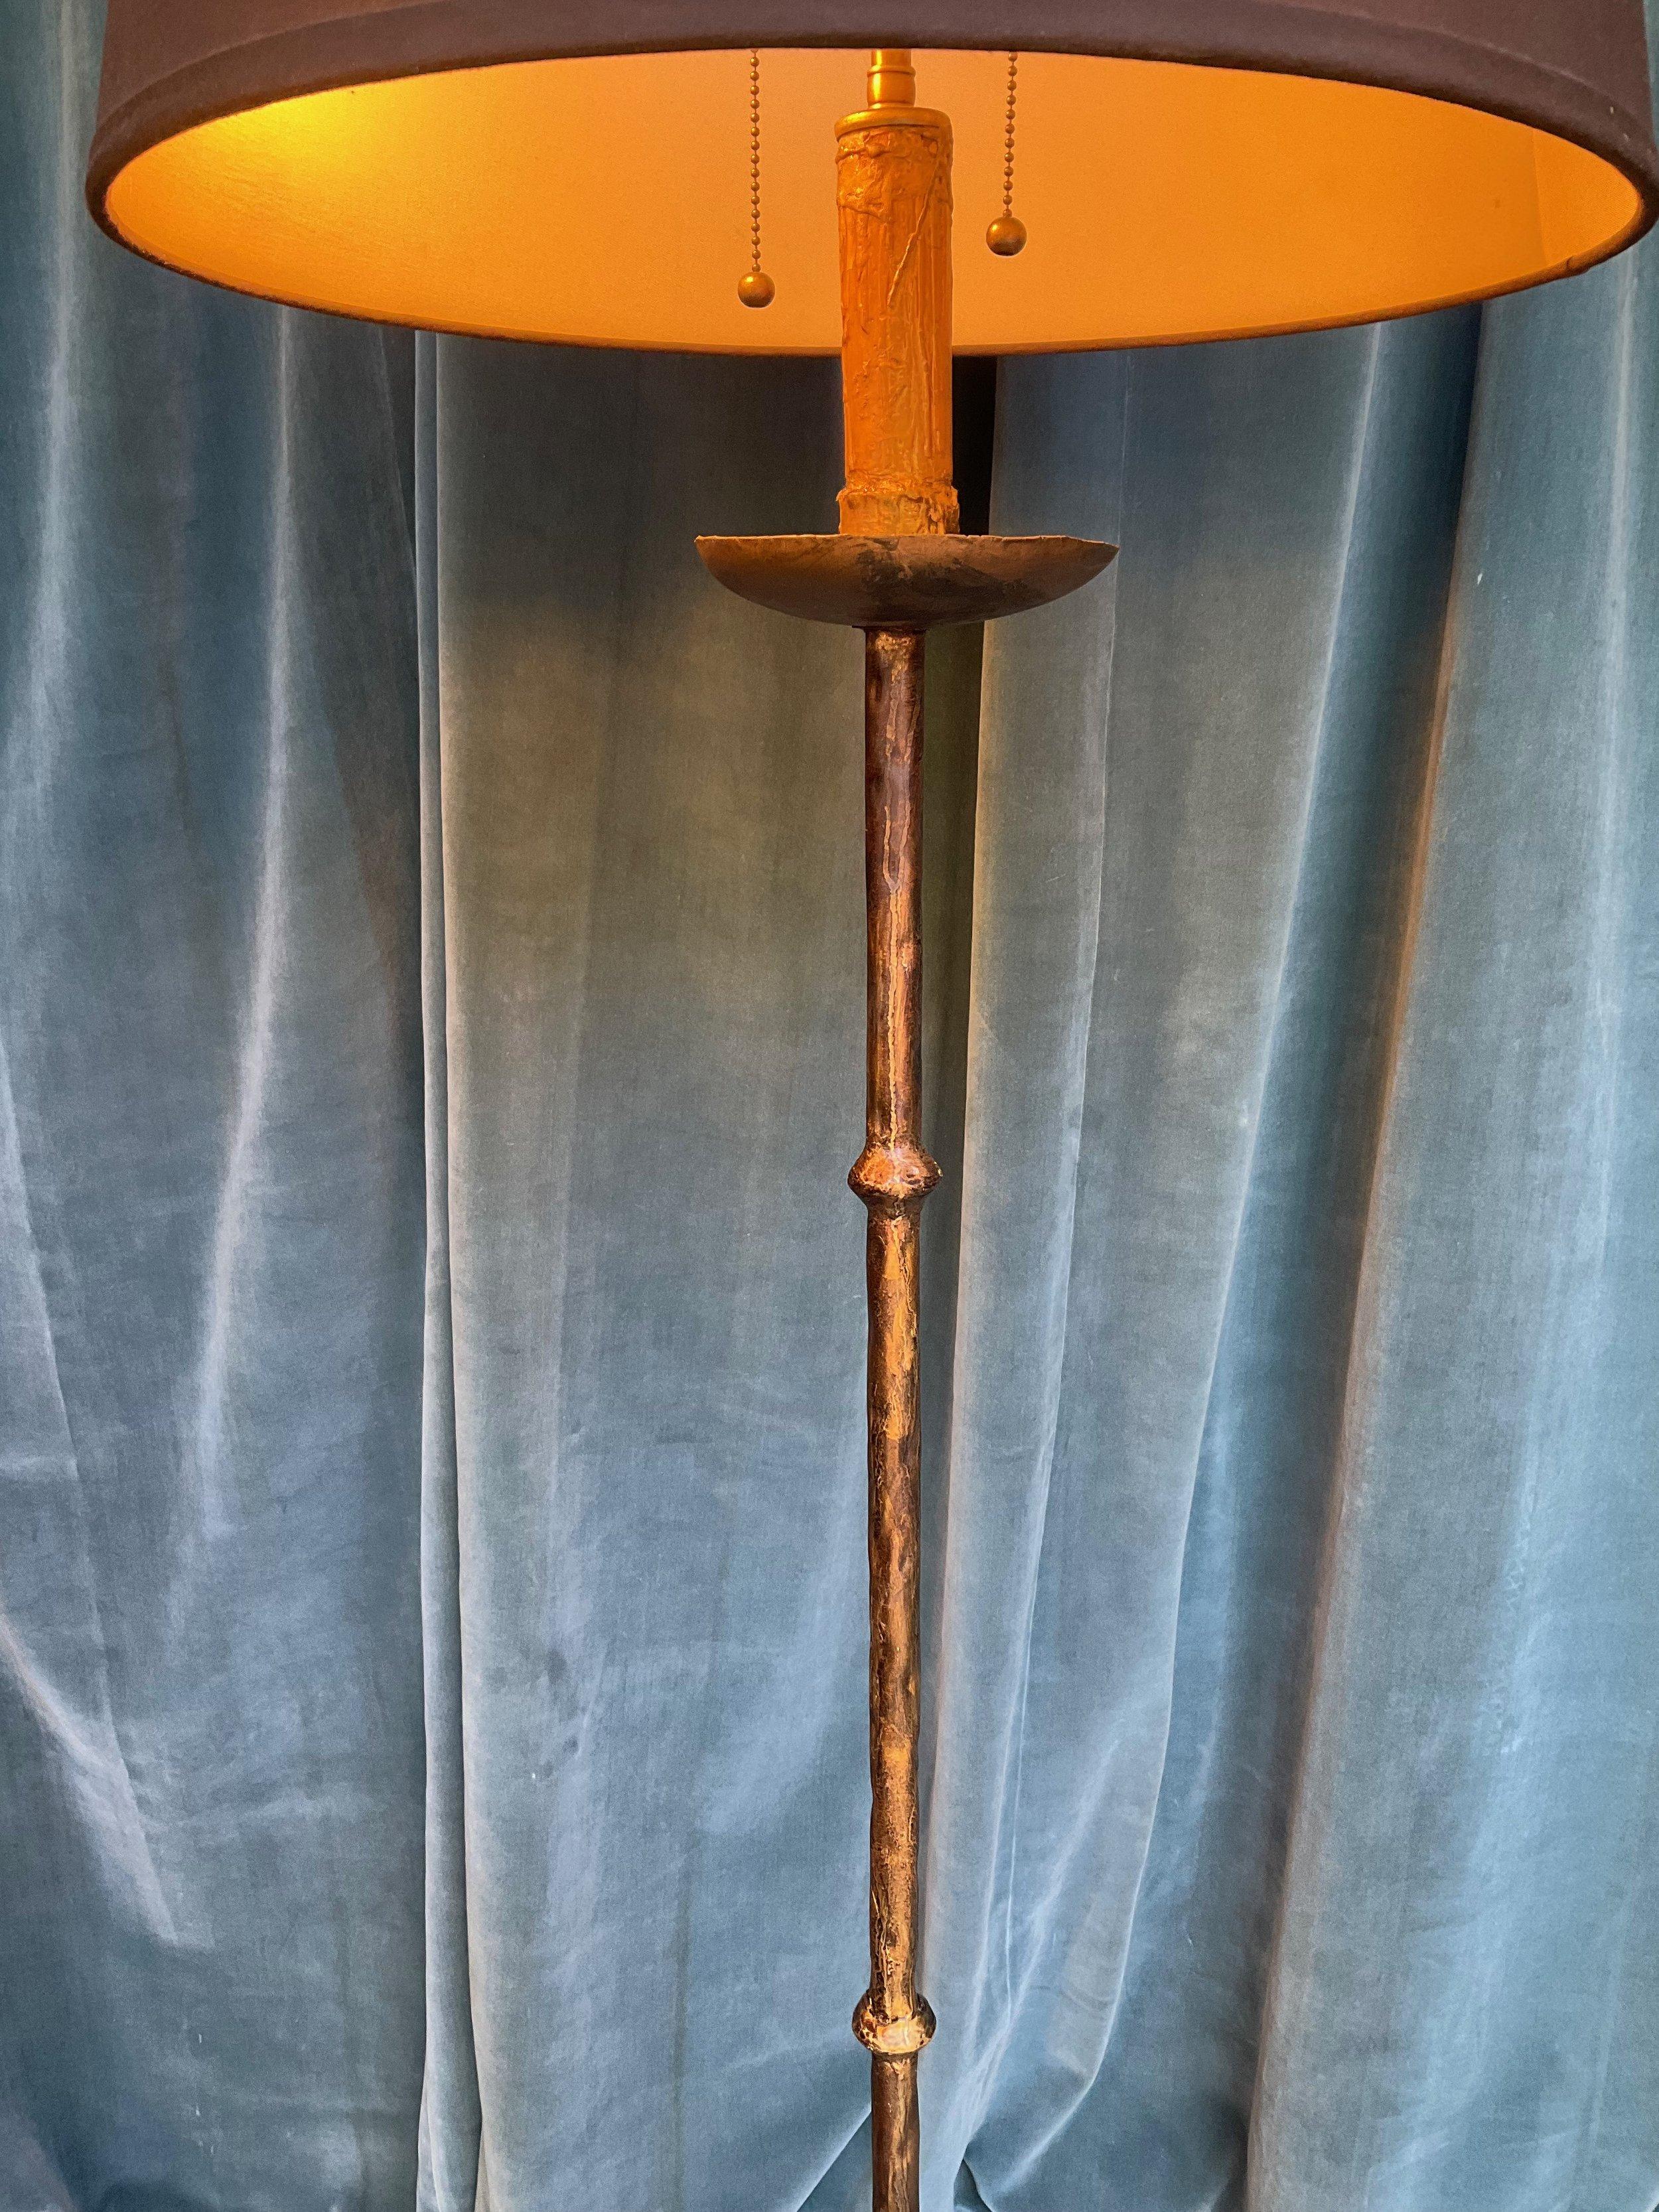 Spanish 1950s Gilt Iron Floor Lamp In Good Condition For Sale In Buchanan, NY